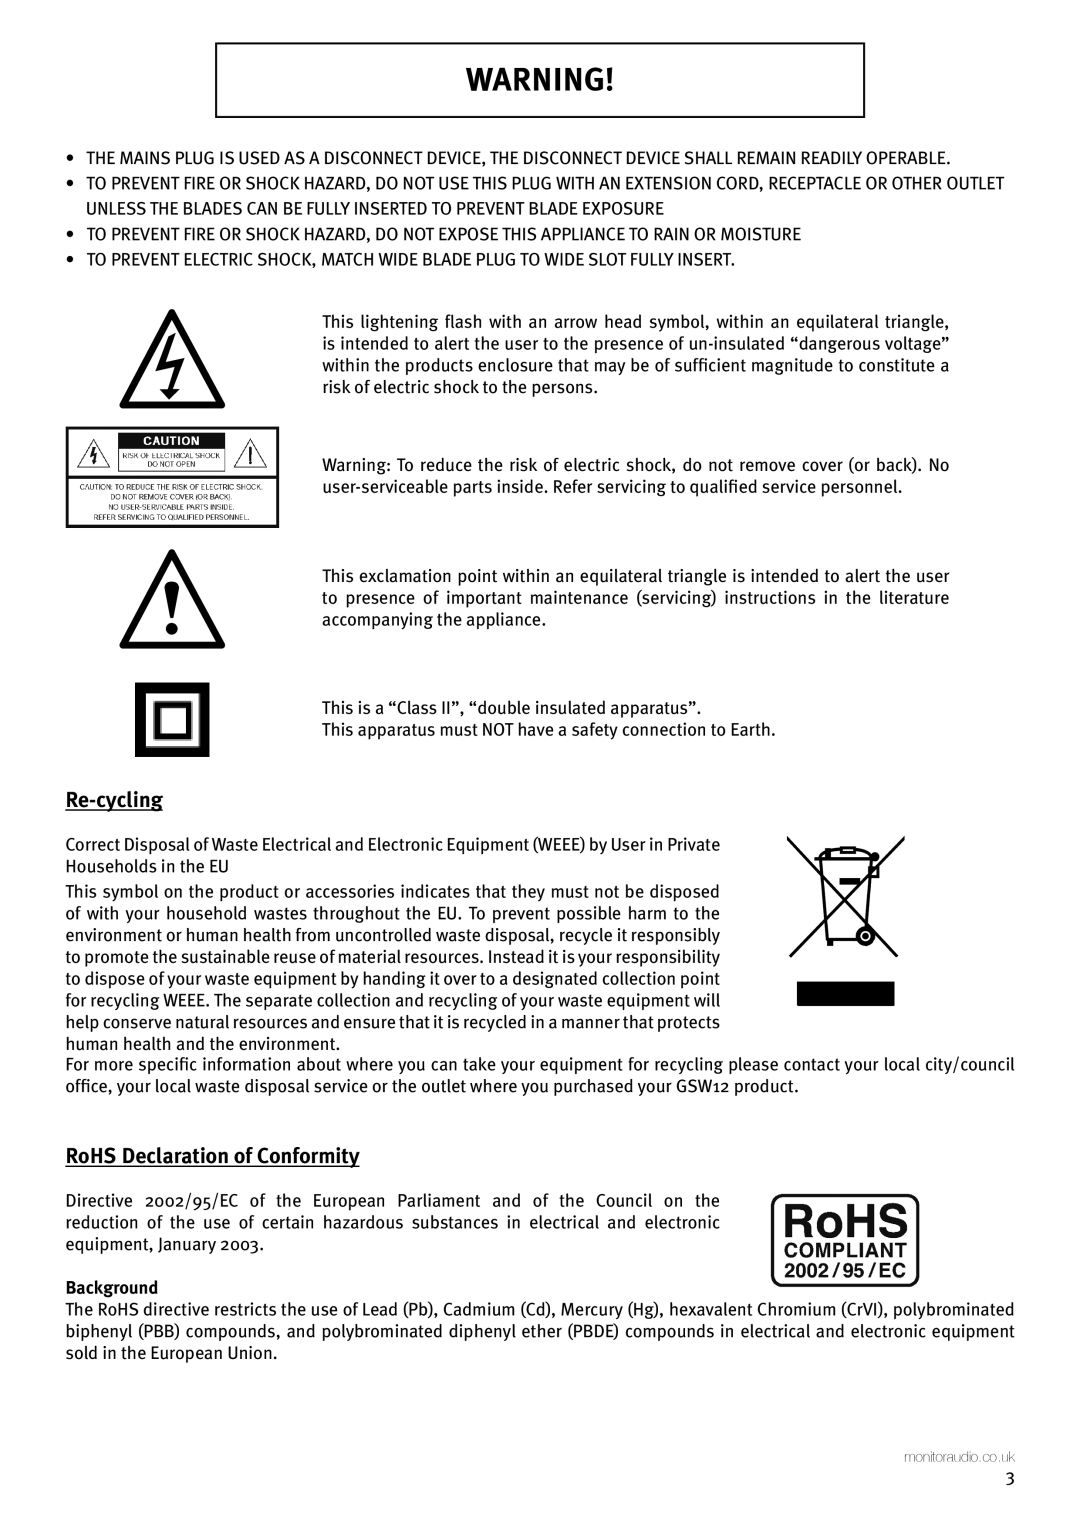 Monitor Audio GSW12 user manual Re-cycling, RoHS Declaration of Conformity, Background 